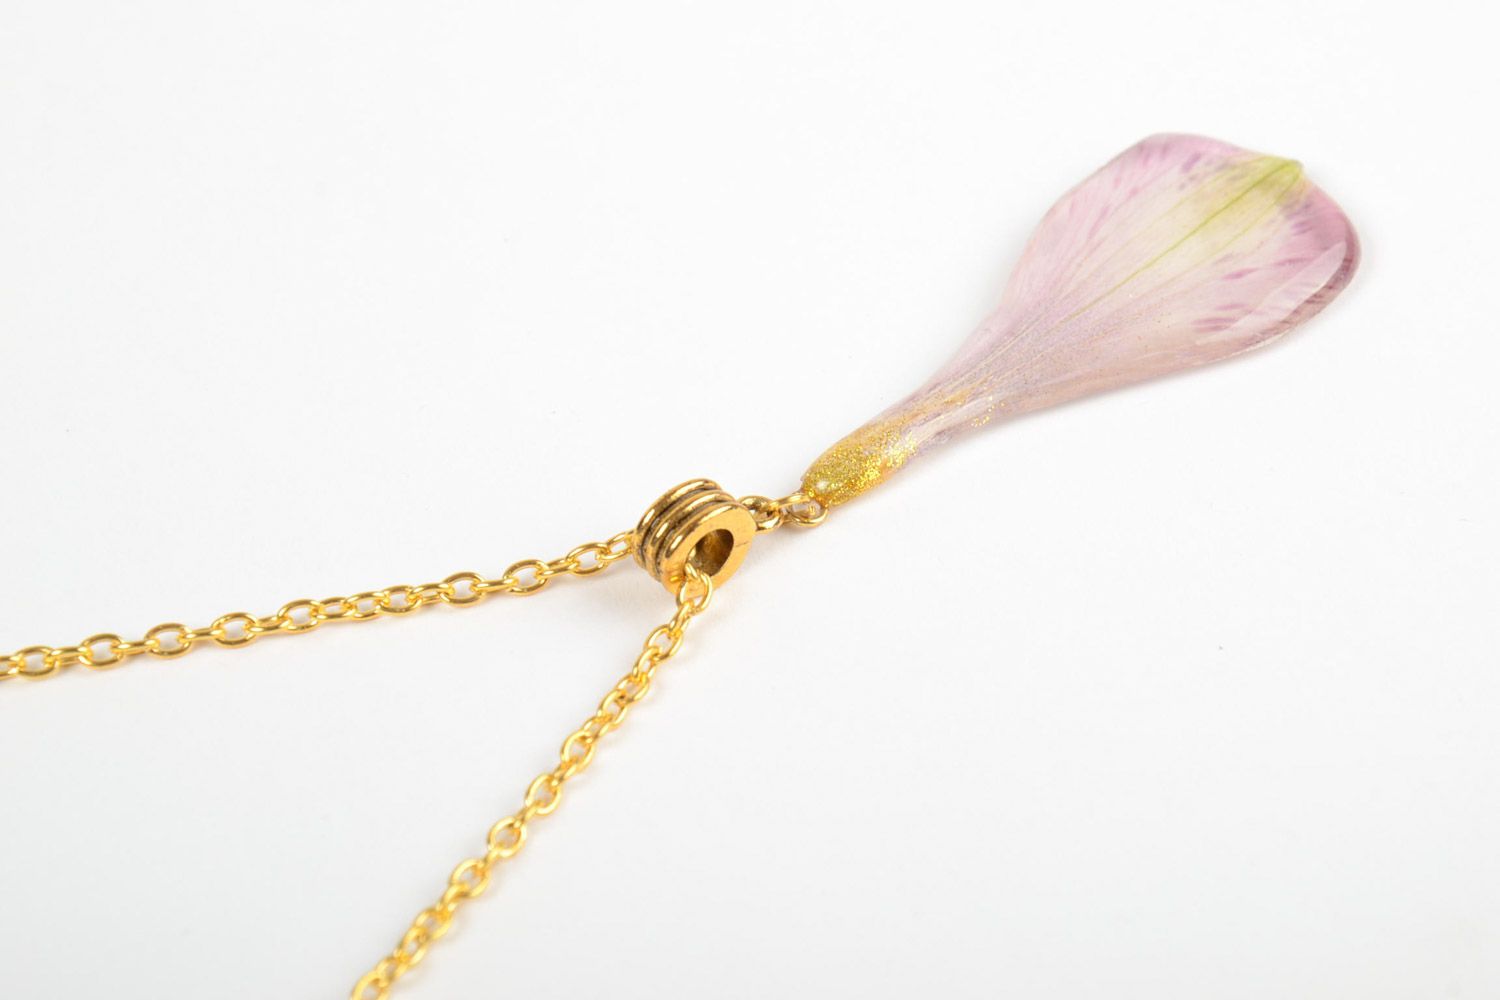 Handmade pendant on long chain with real flower petal coated with epoxy photo 4